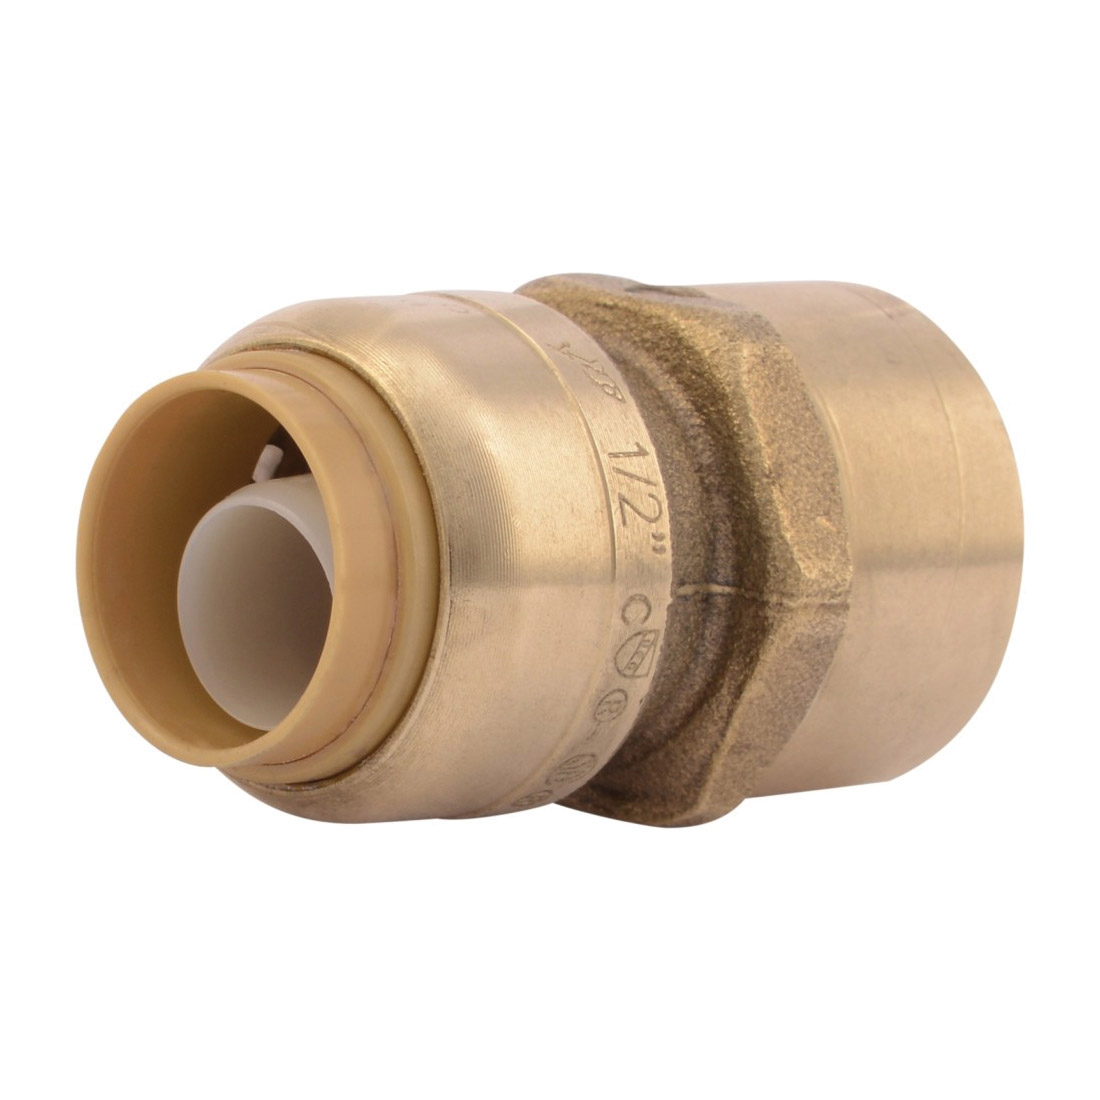 Sharkbite® U072LF Straight Female Connector, 1/2 in Nominal, Push-Fit x FNPT End Style, Brass, Import